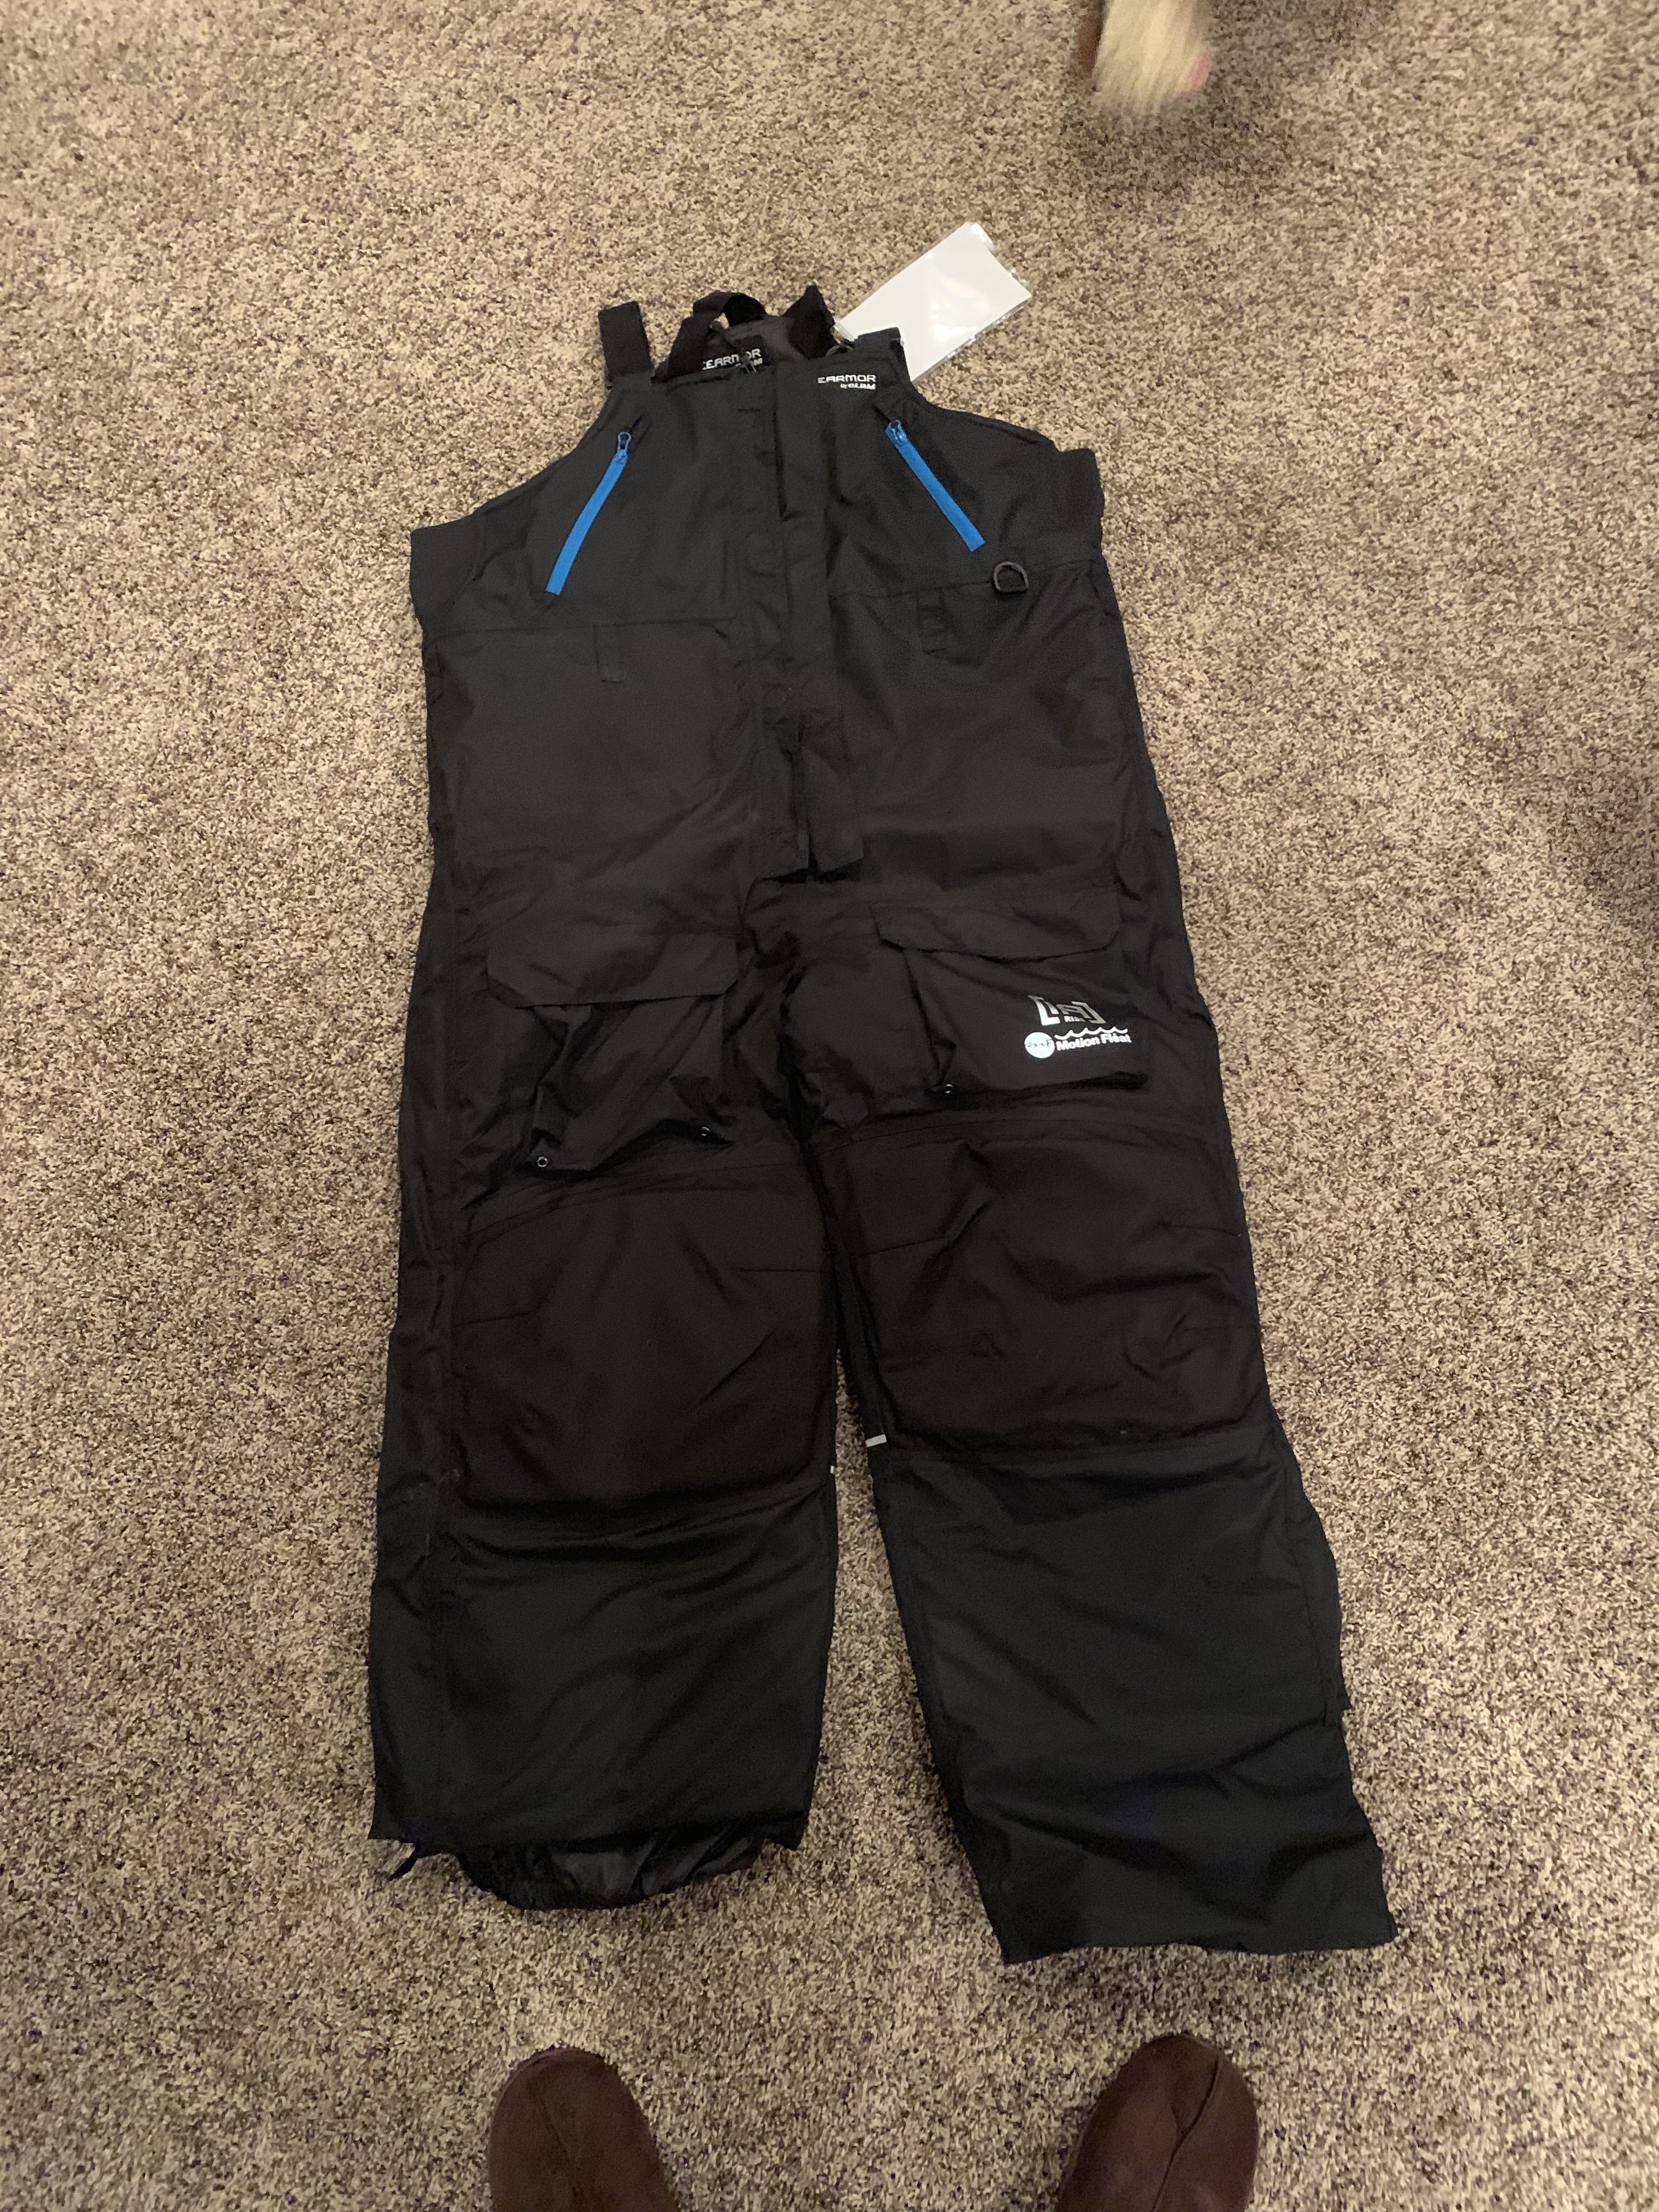 New Ice Armor Rise Float Suit Bibs SIze XL - Classified Ads | In-Depth ...